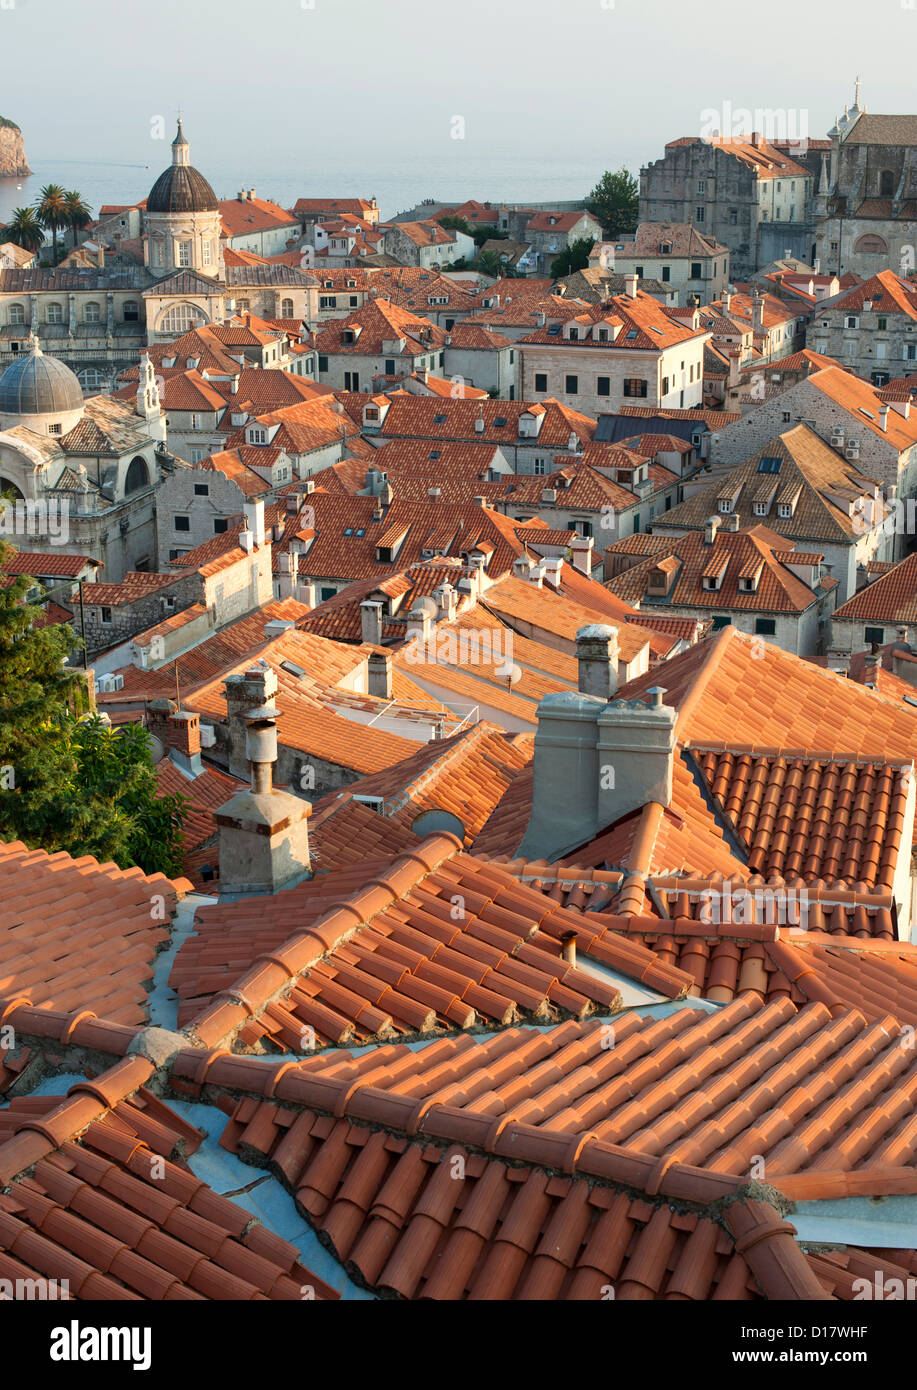 View over the rooftops of the old town in the city of Dubrovnik on the Adriatic coast of Croatia. Stock Photo